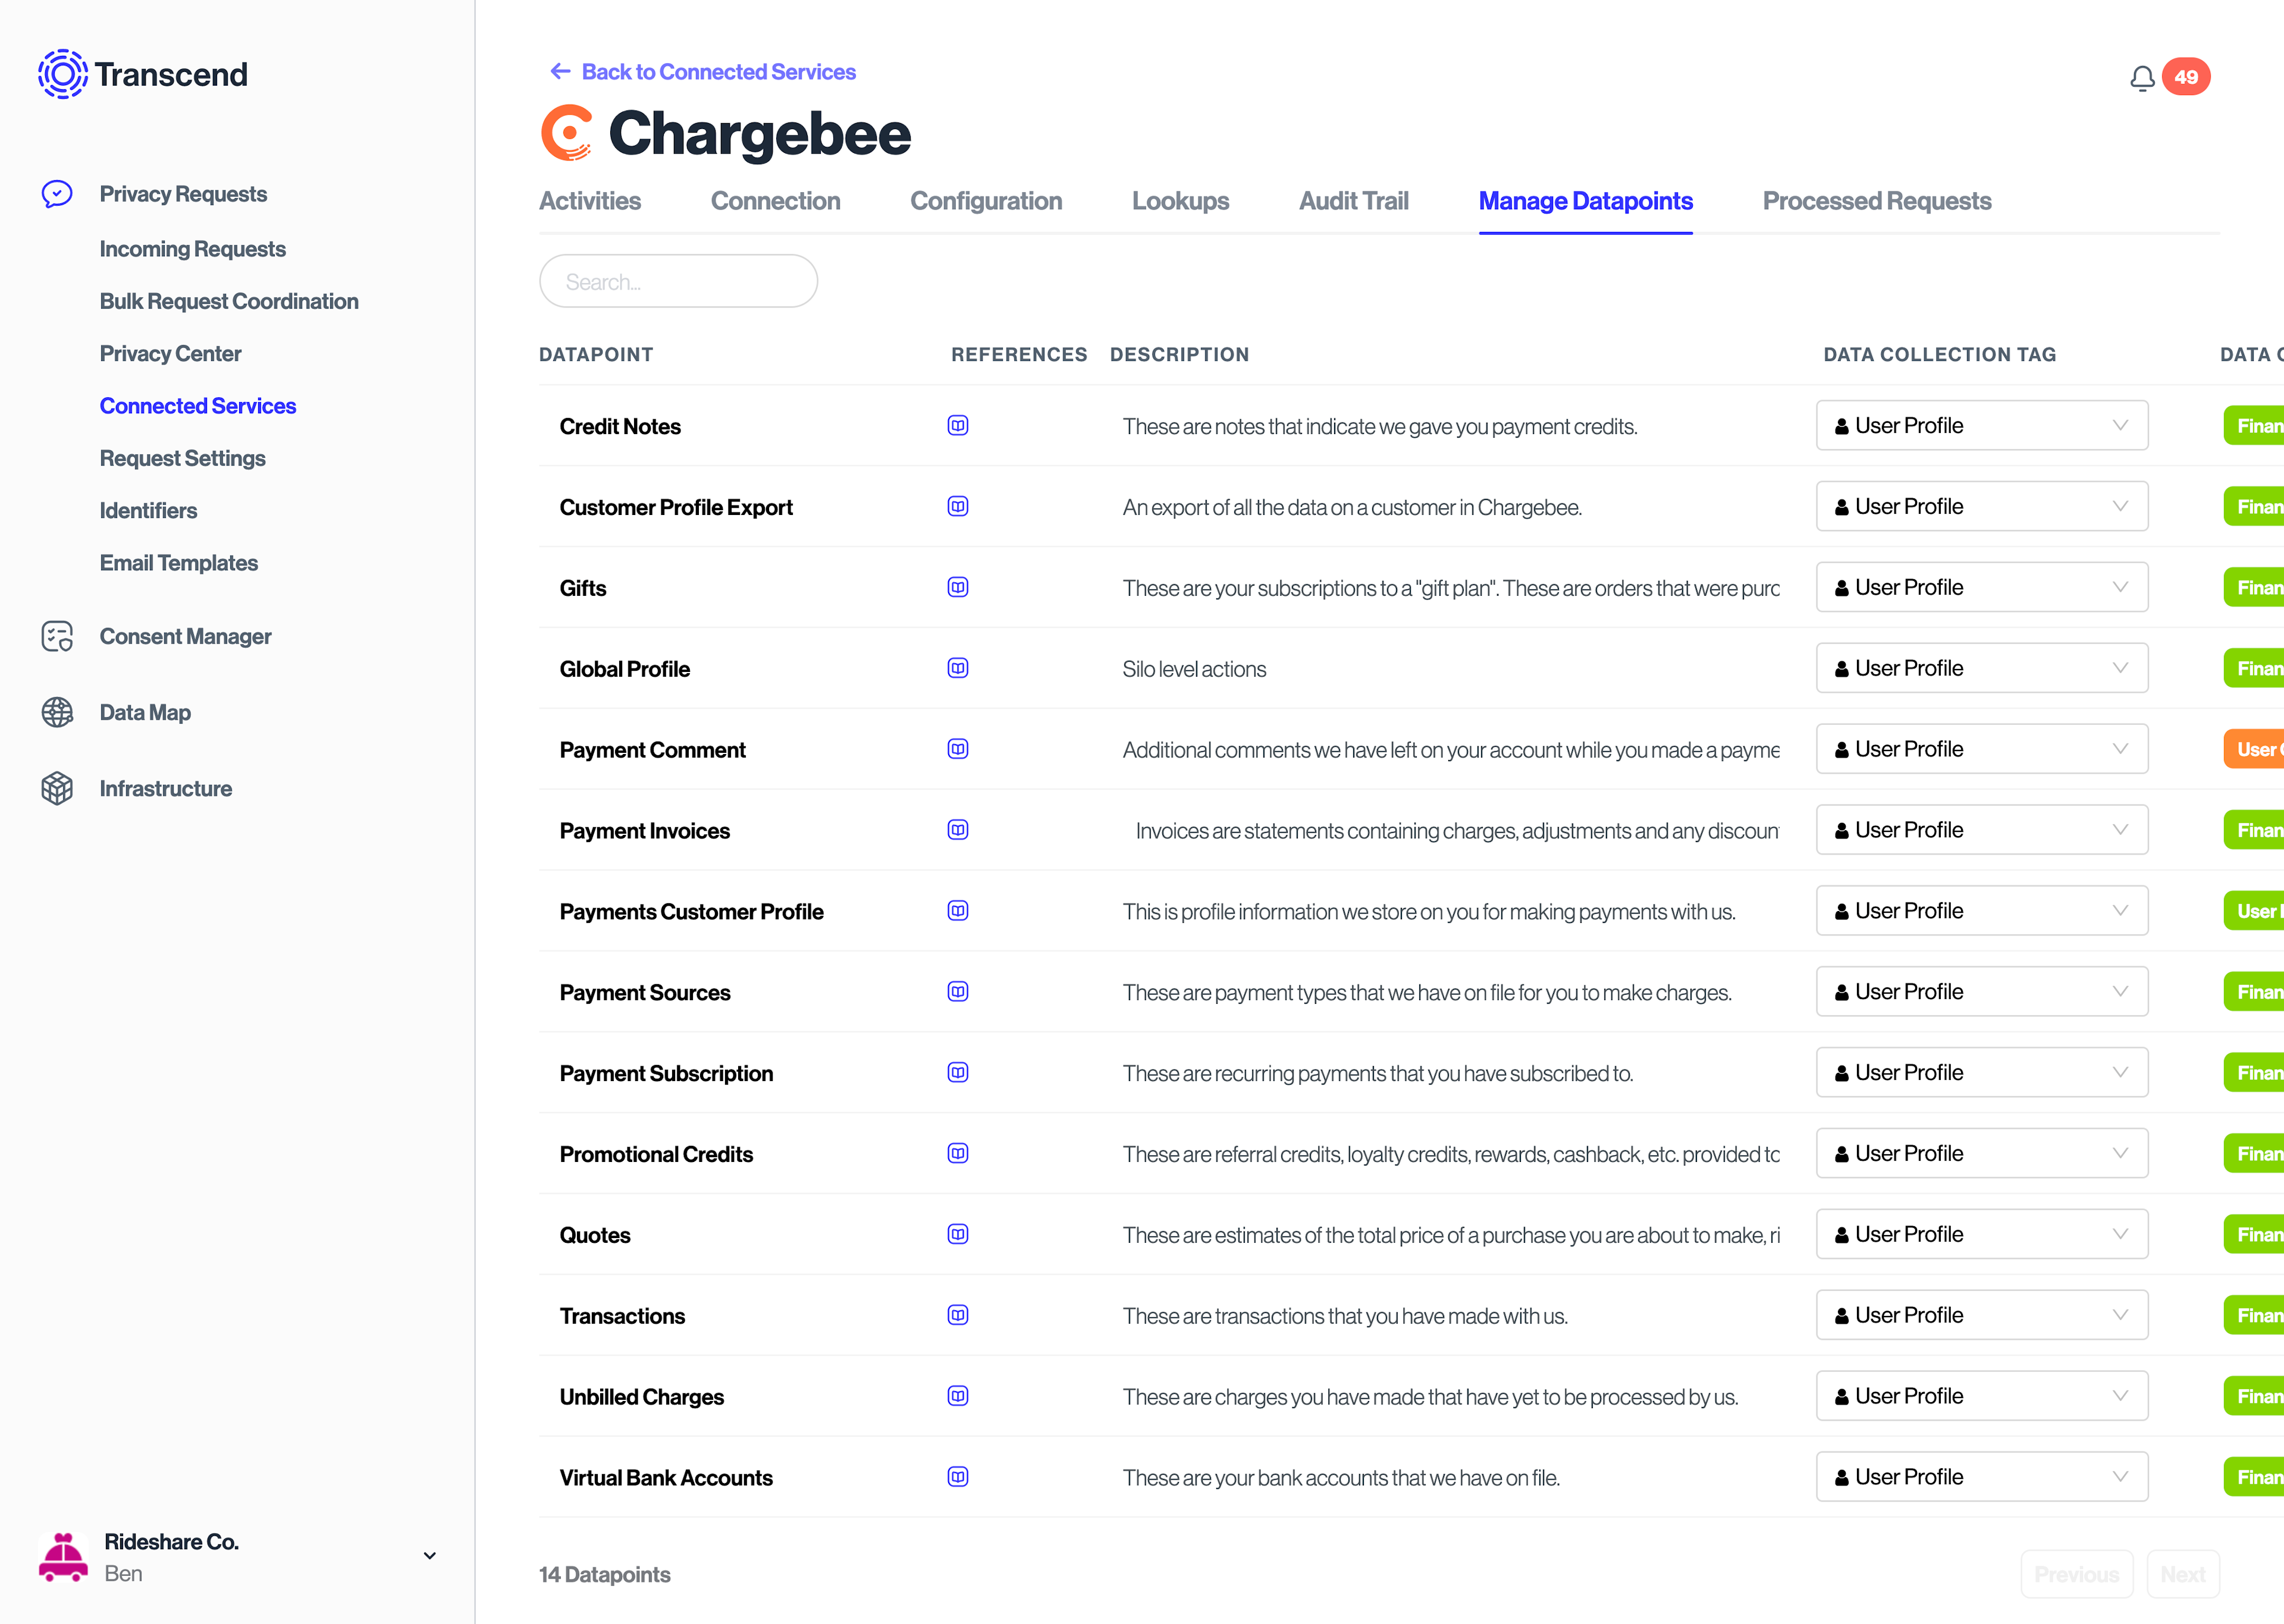 The datapoint configuration page for a Chargebee data silo.